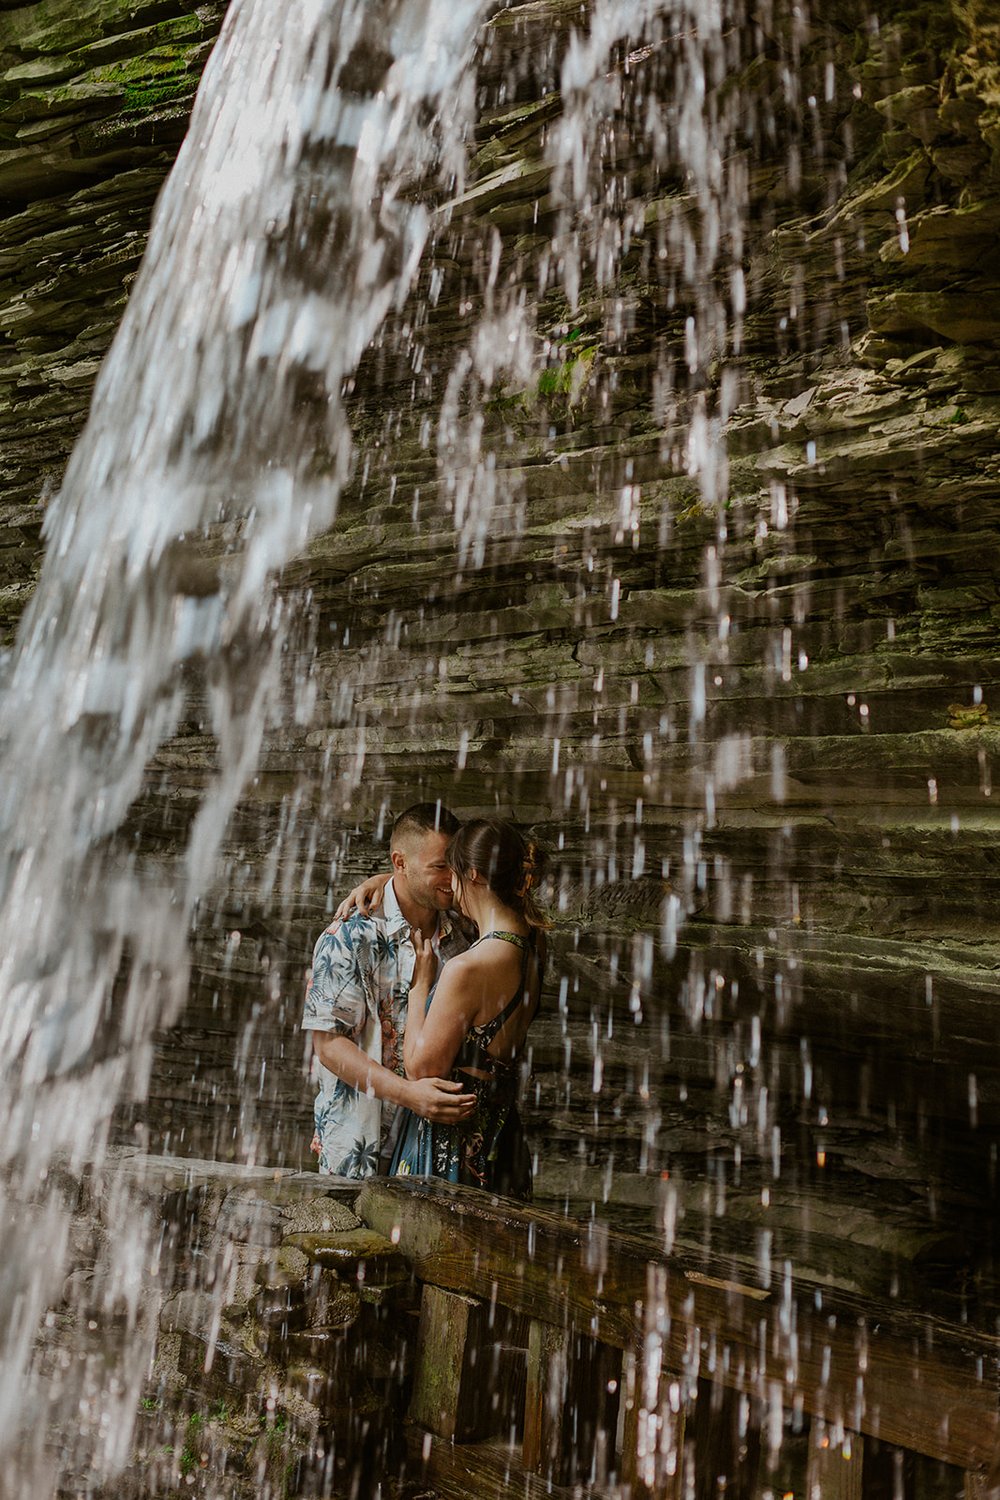 Maggie and Hade hide under the falls sharing an intimate moment together with the sound of the water flowing down the rocks.